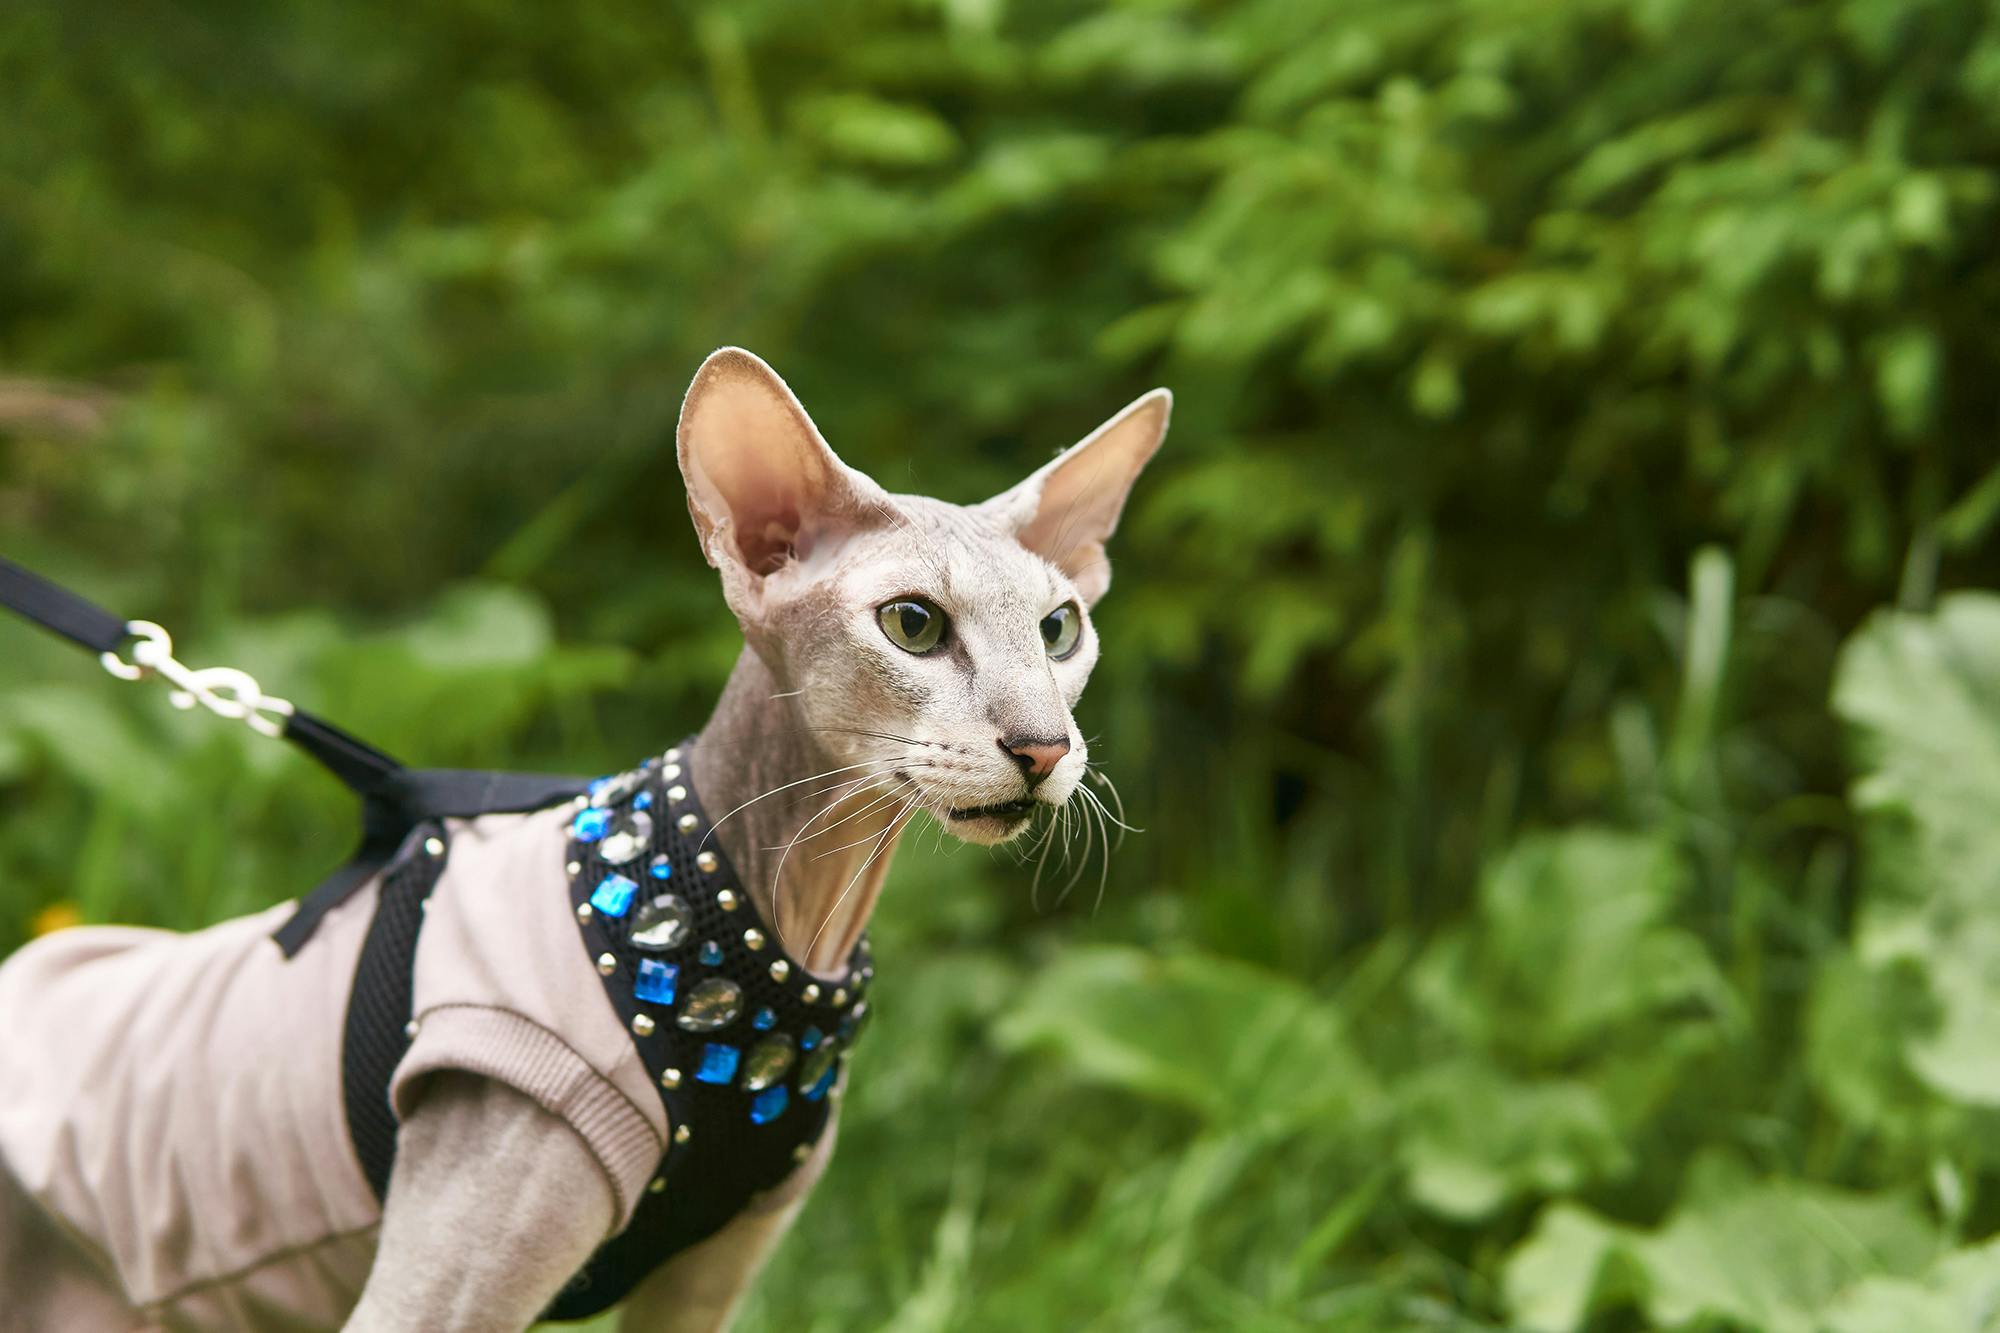 Peterbald cat on a leash outside.